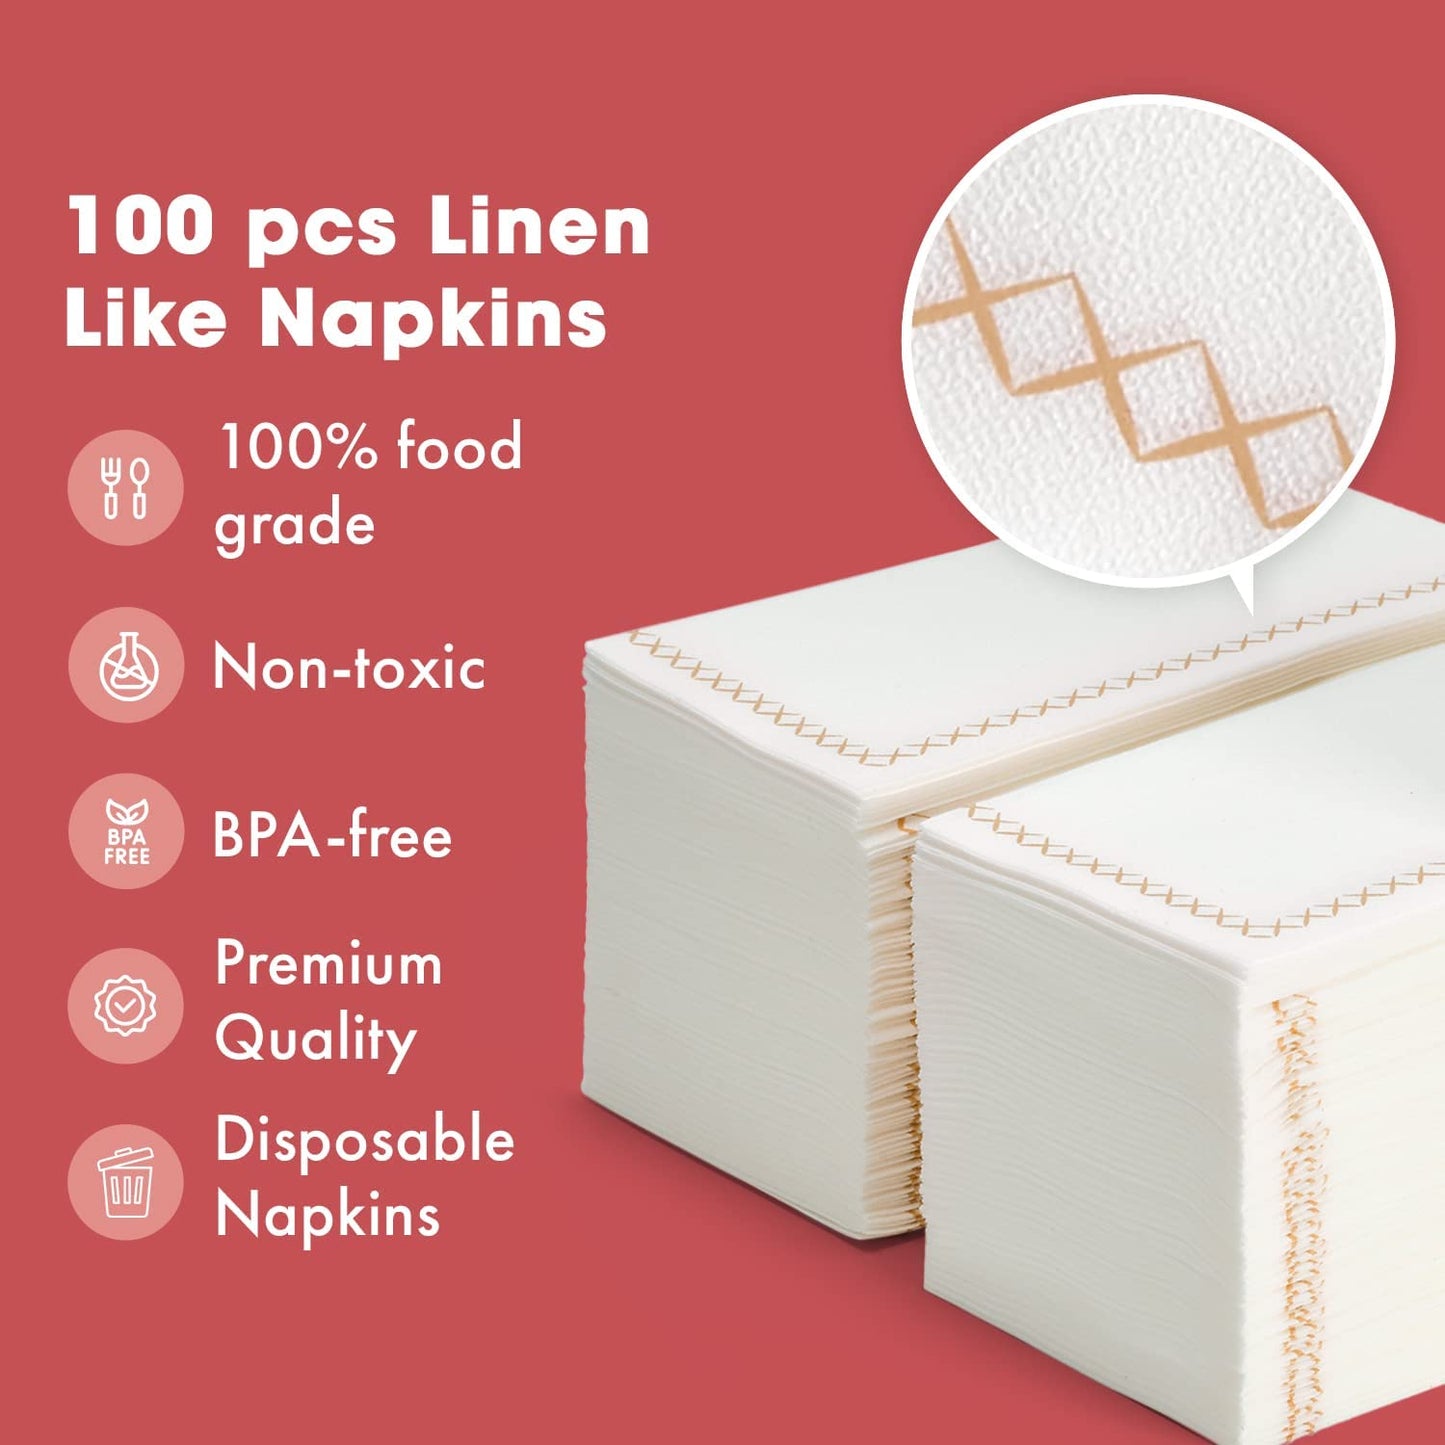 Fancy Paper Napkins - Perfect Disposable Guest Hand Towels for Bathrooms